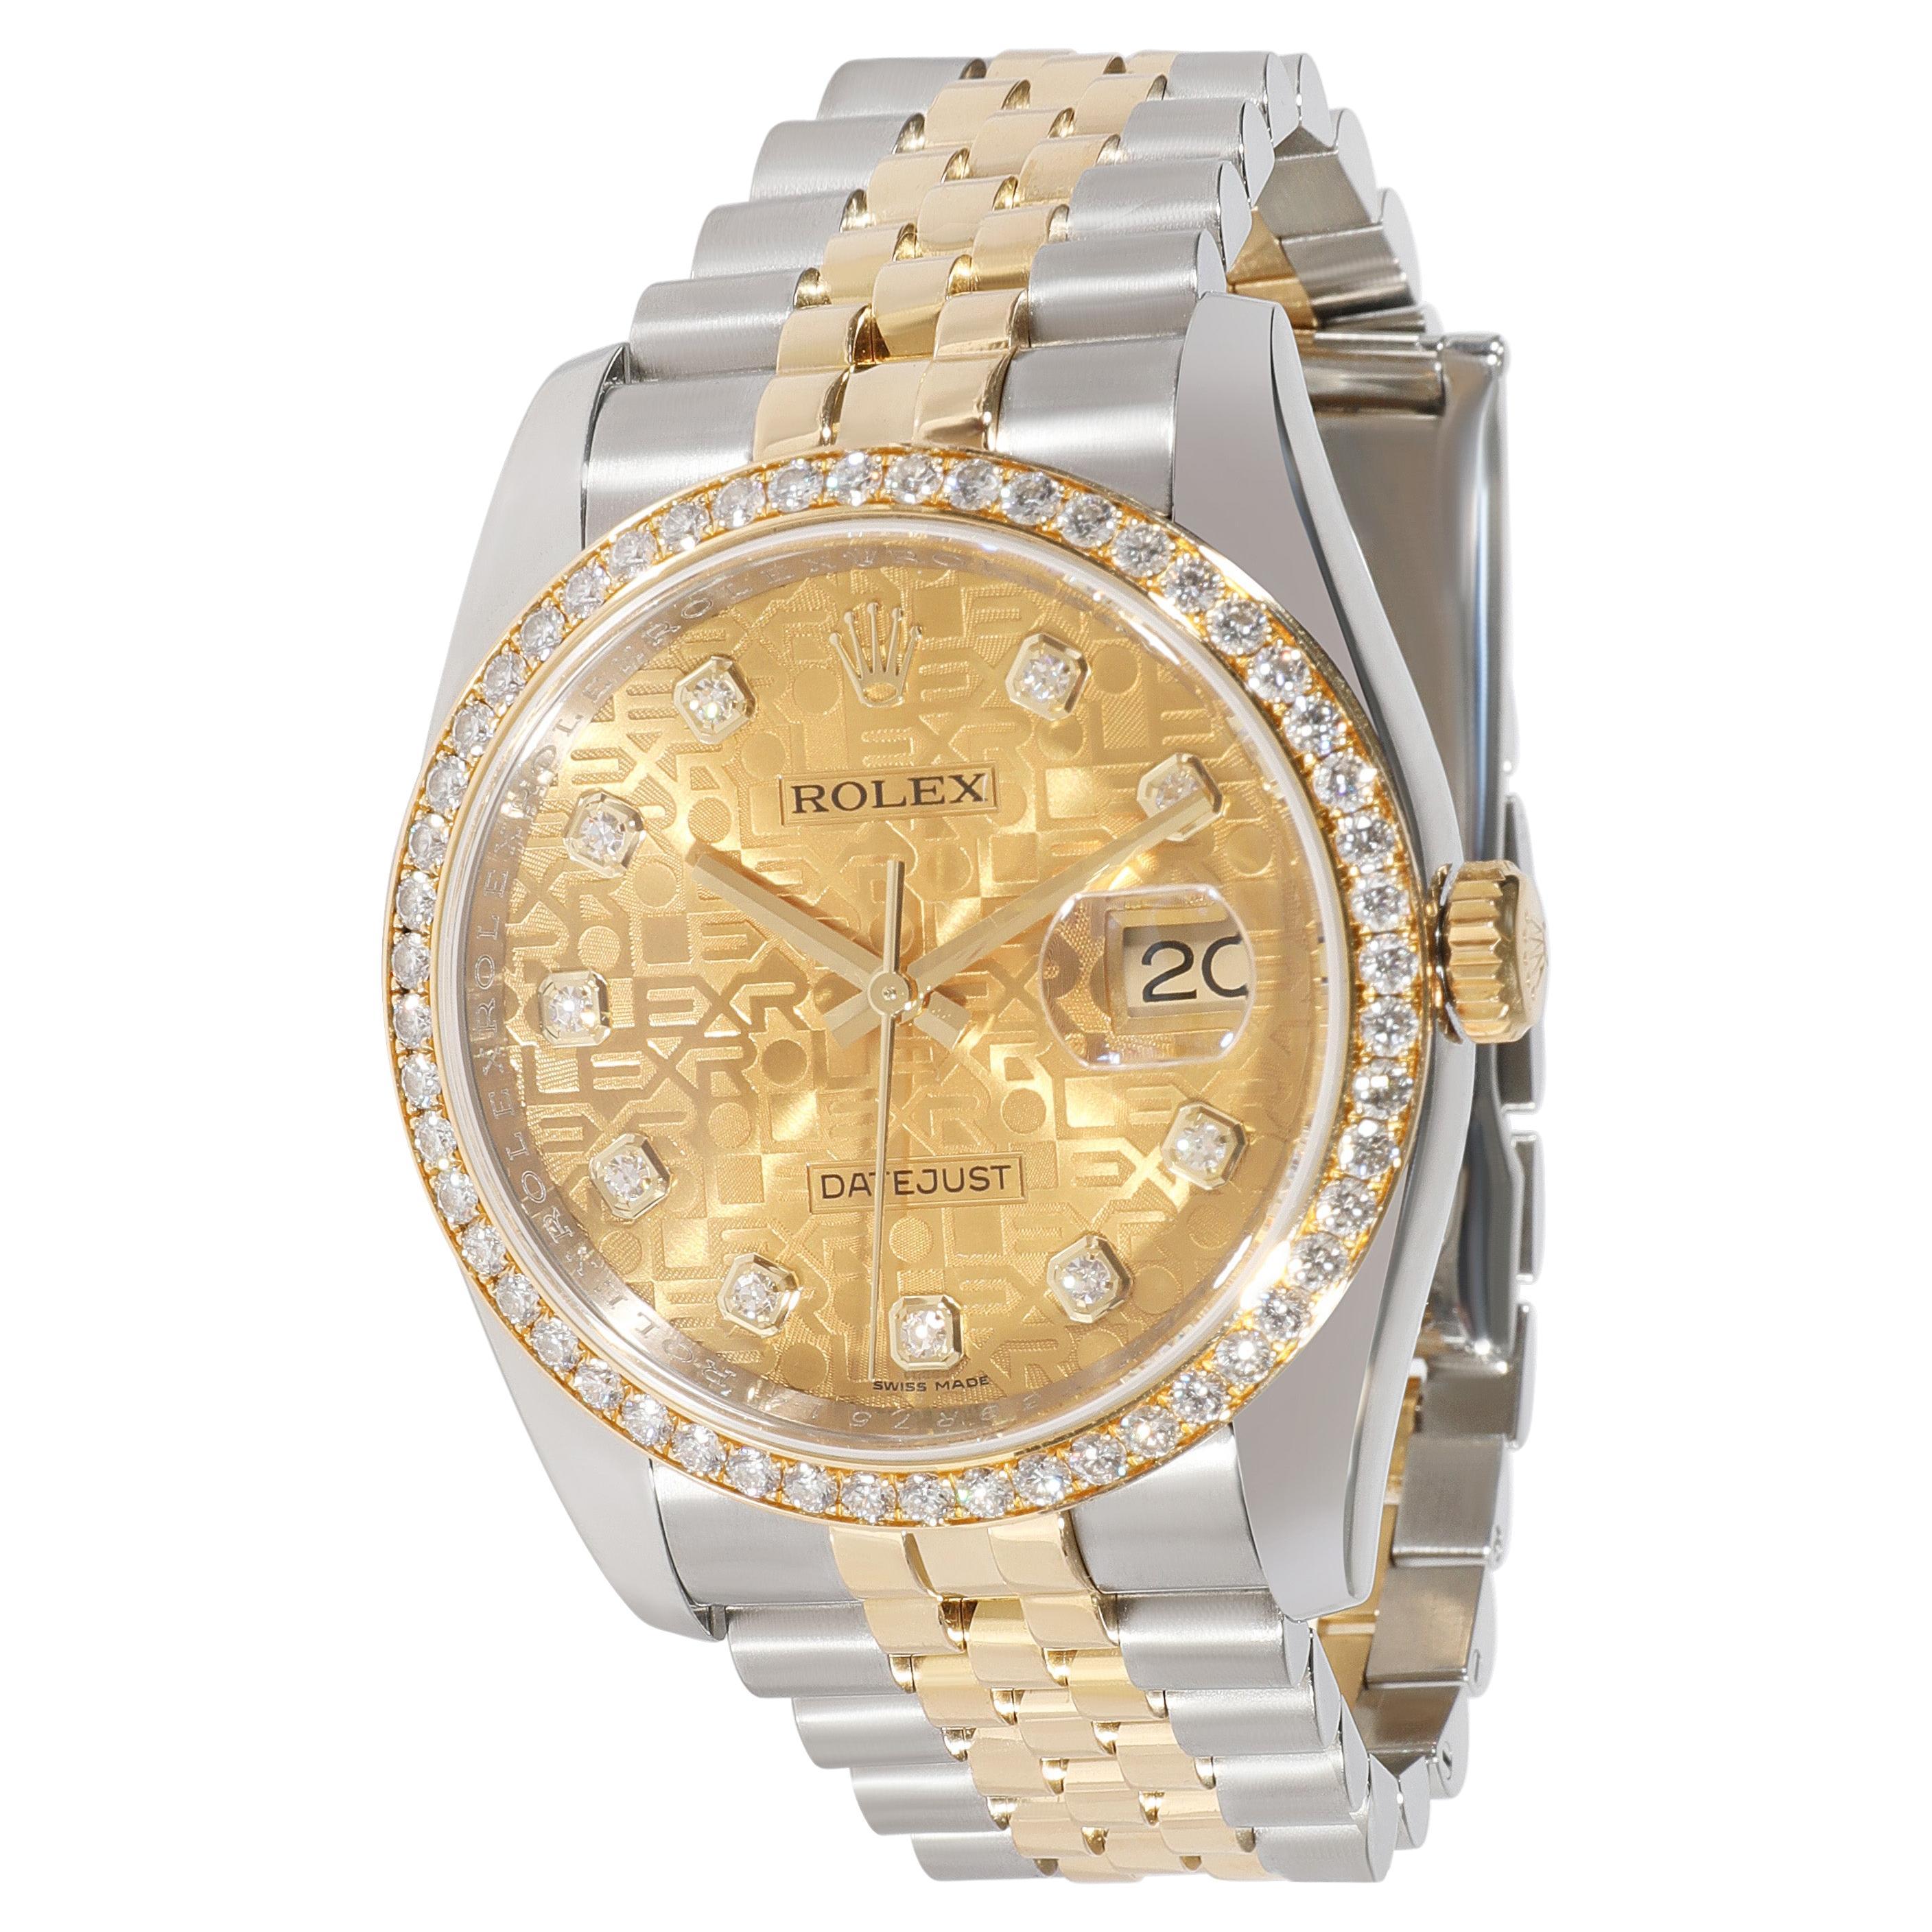 Rolex Datejust 116243 Men's Watch in Stainless Steel / Yellow Gold